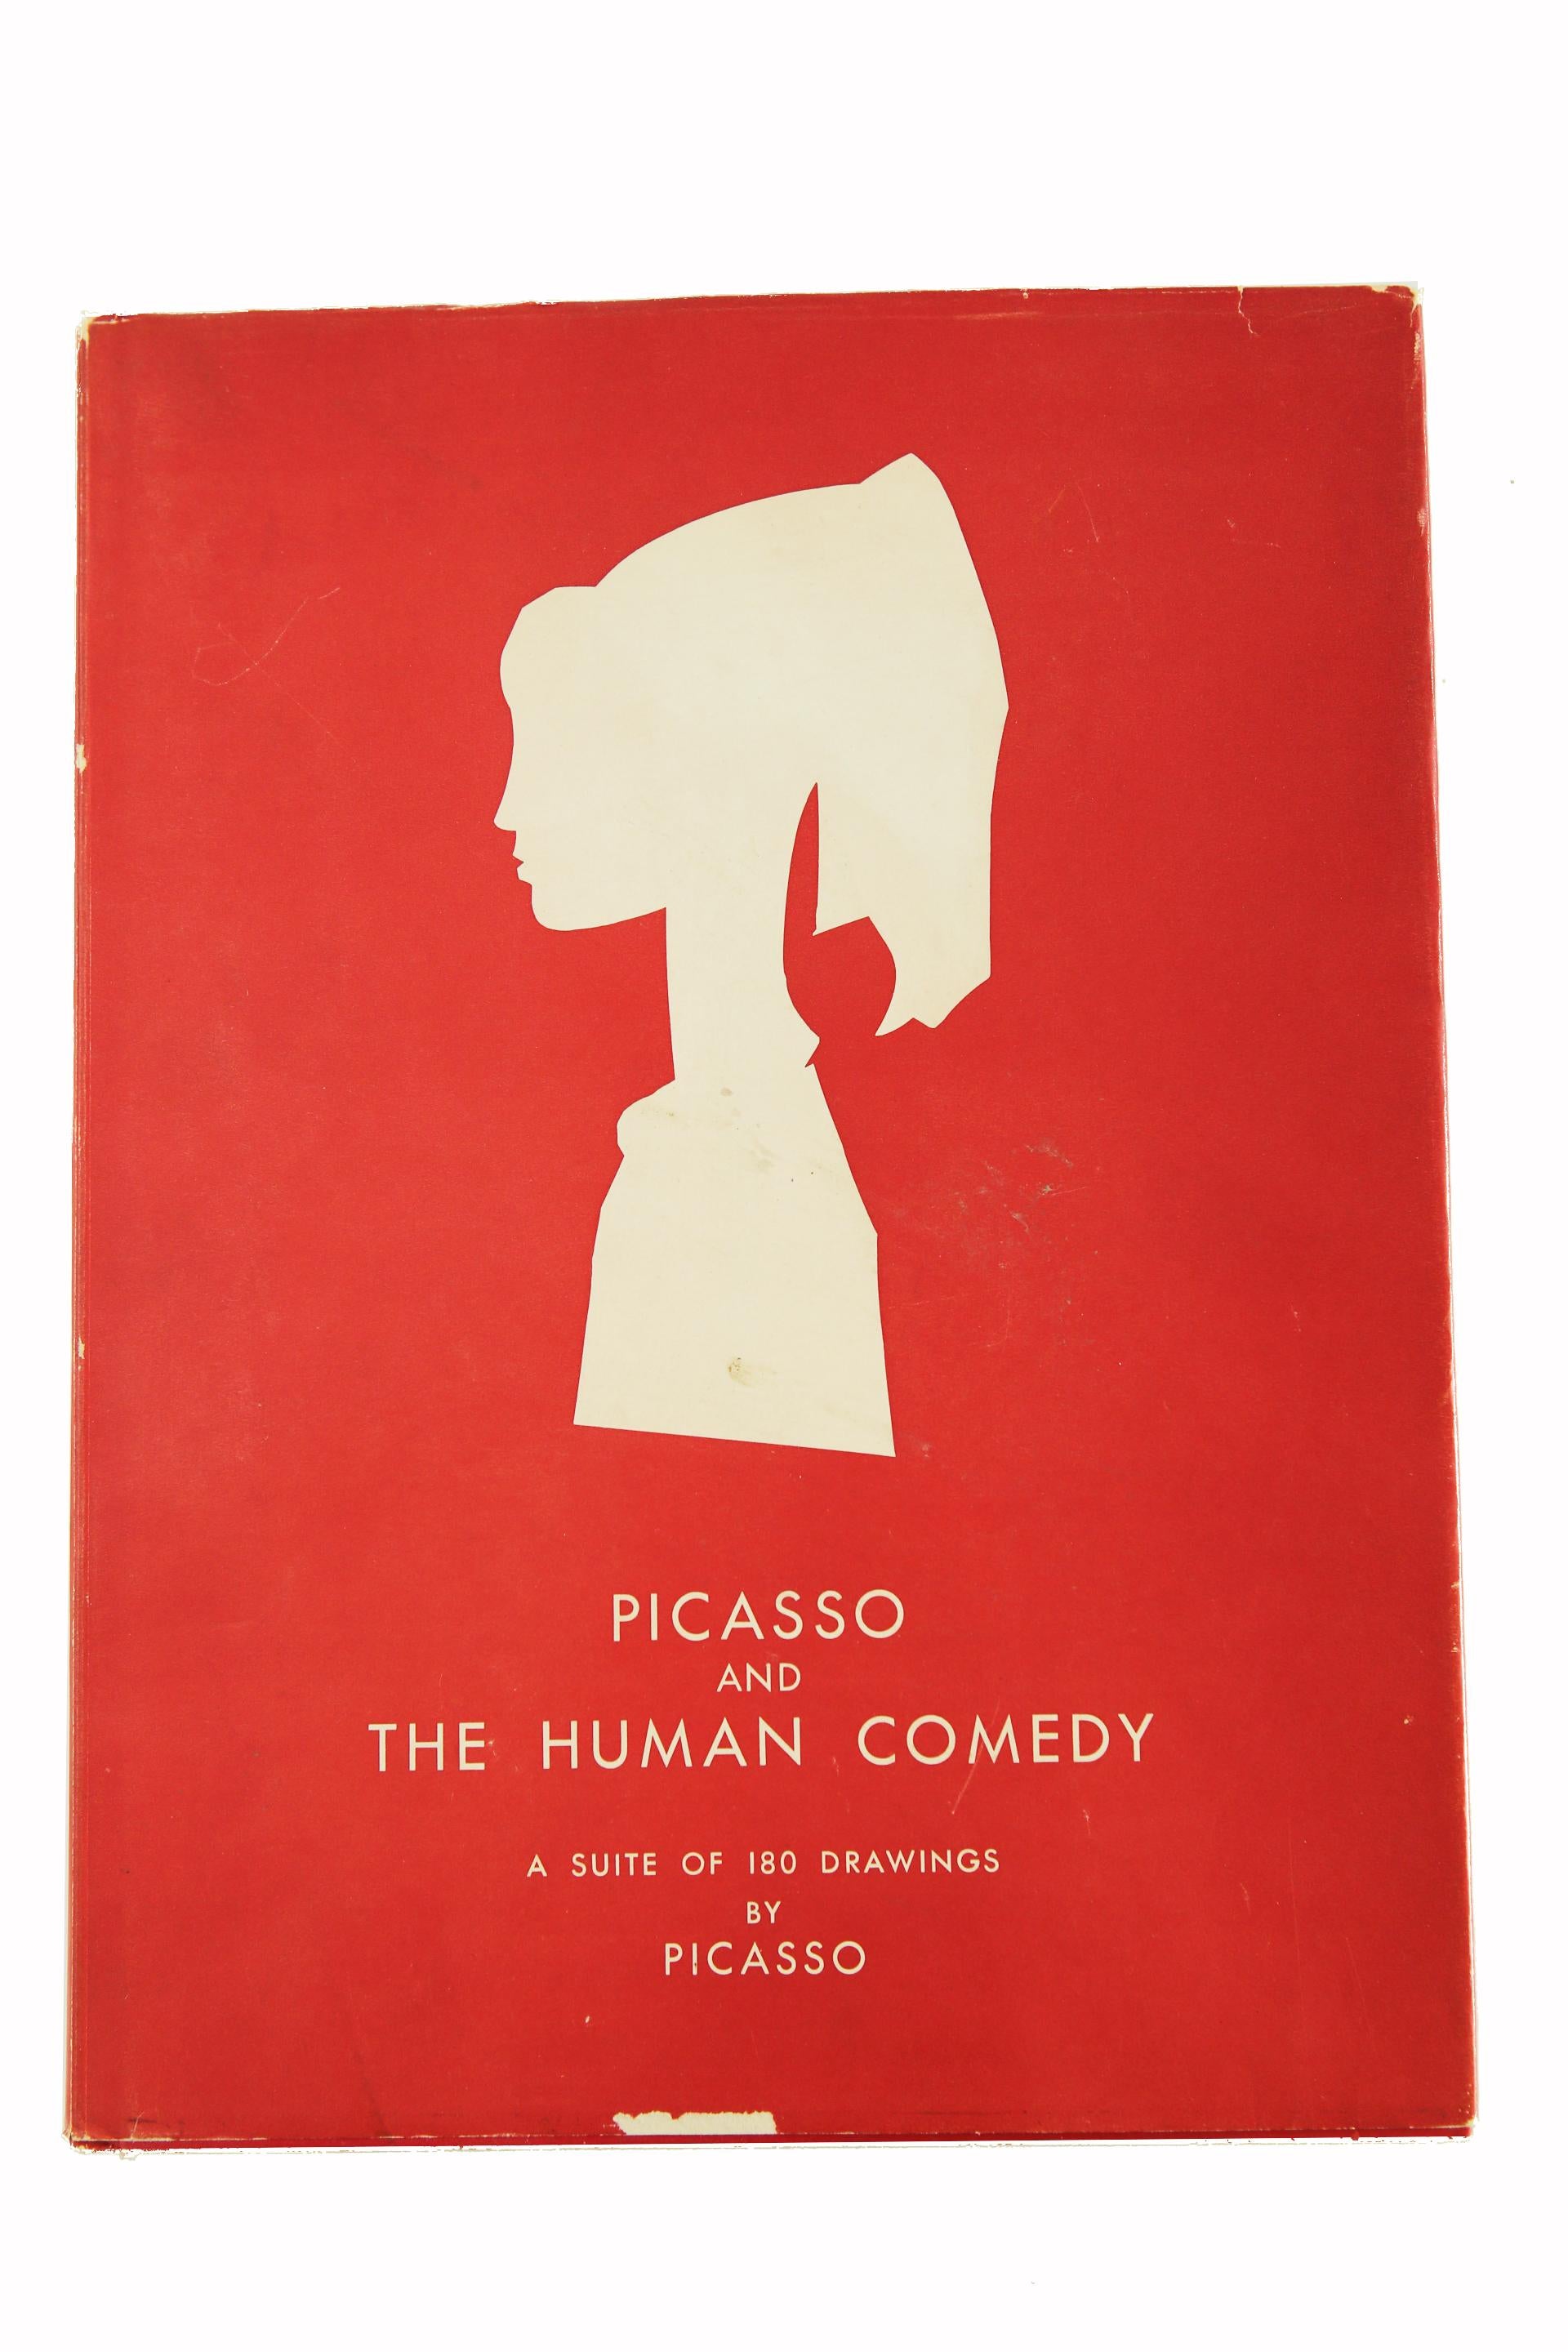 Picasso and the Human Comedy.  A Suite of 180 Drawings by Picasso. (Verve 29-30)